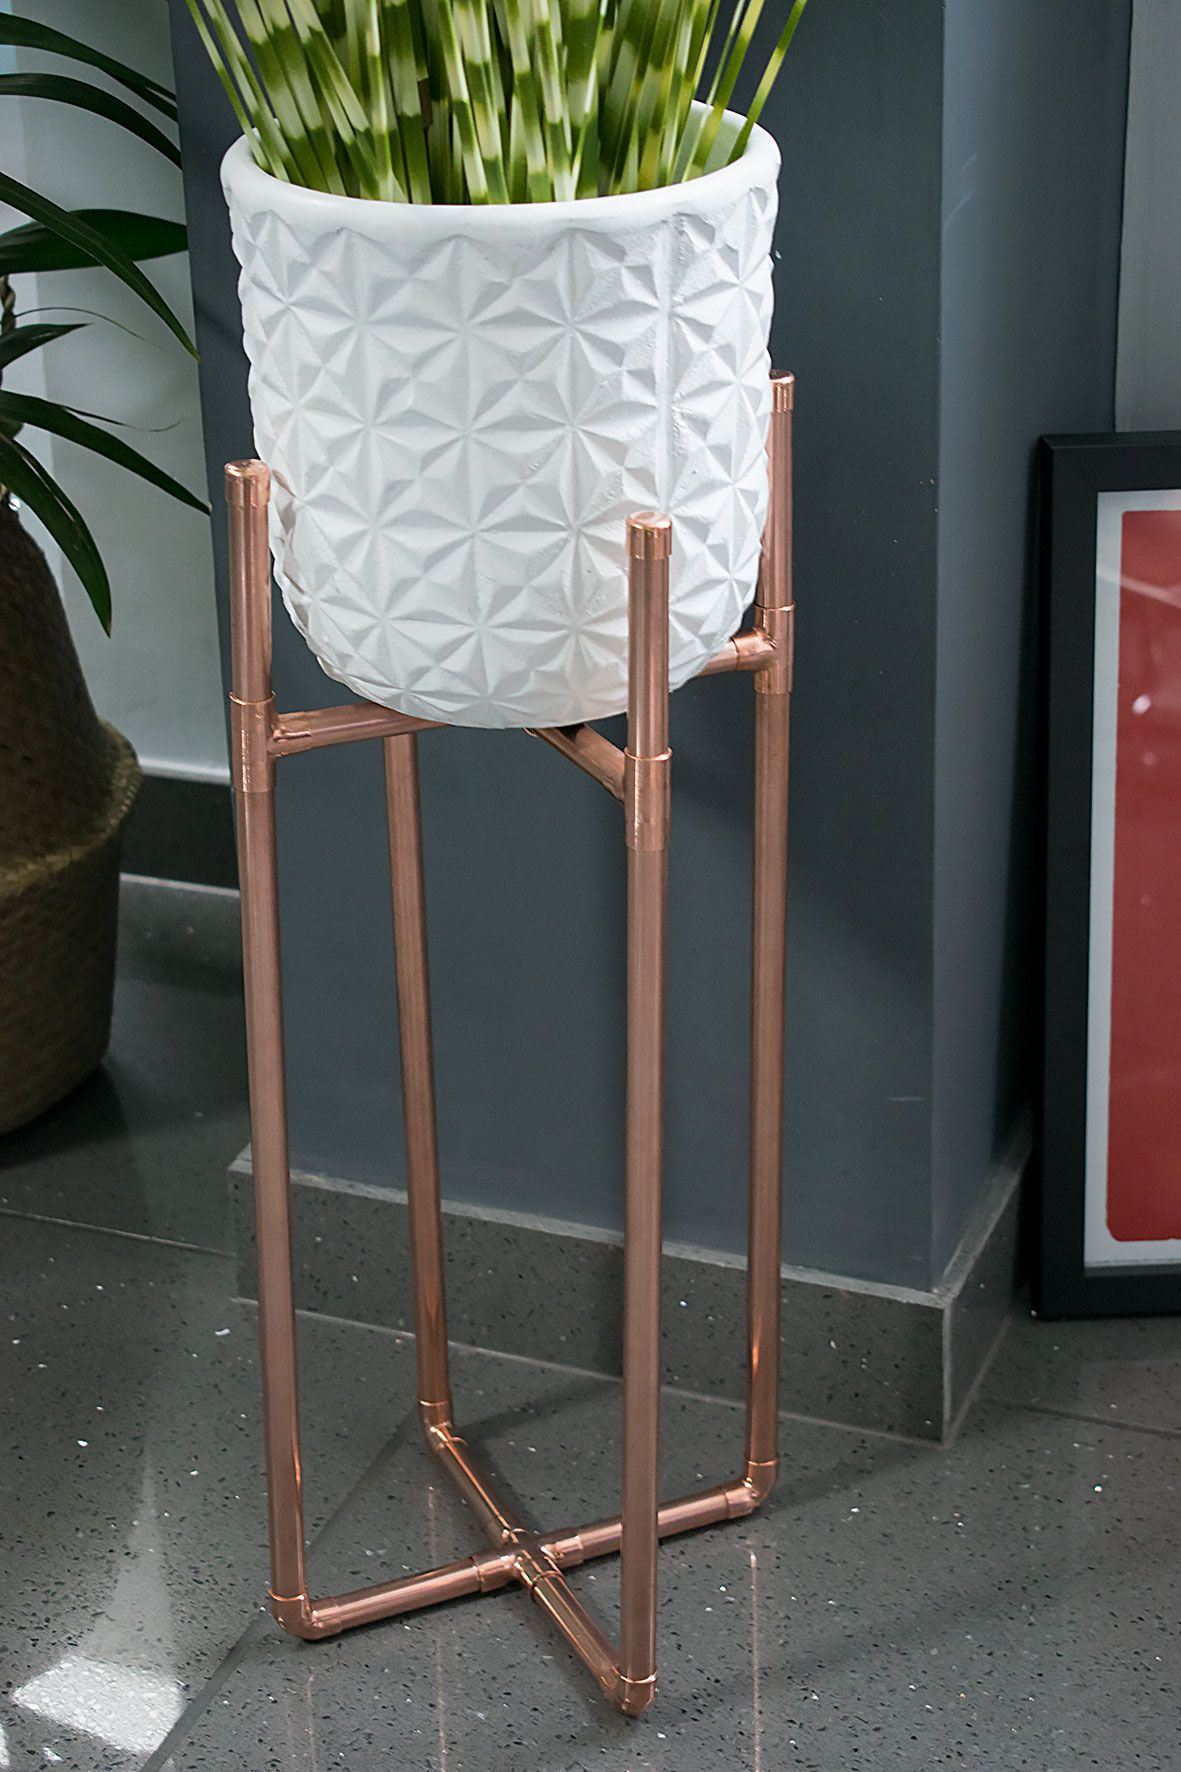 How To Make A Diy Copper Plant Stand – Caradise With Regard To Copper Plant Stands (View 2 of 15)